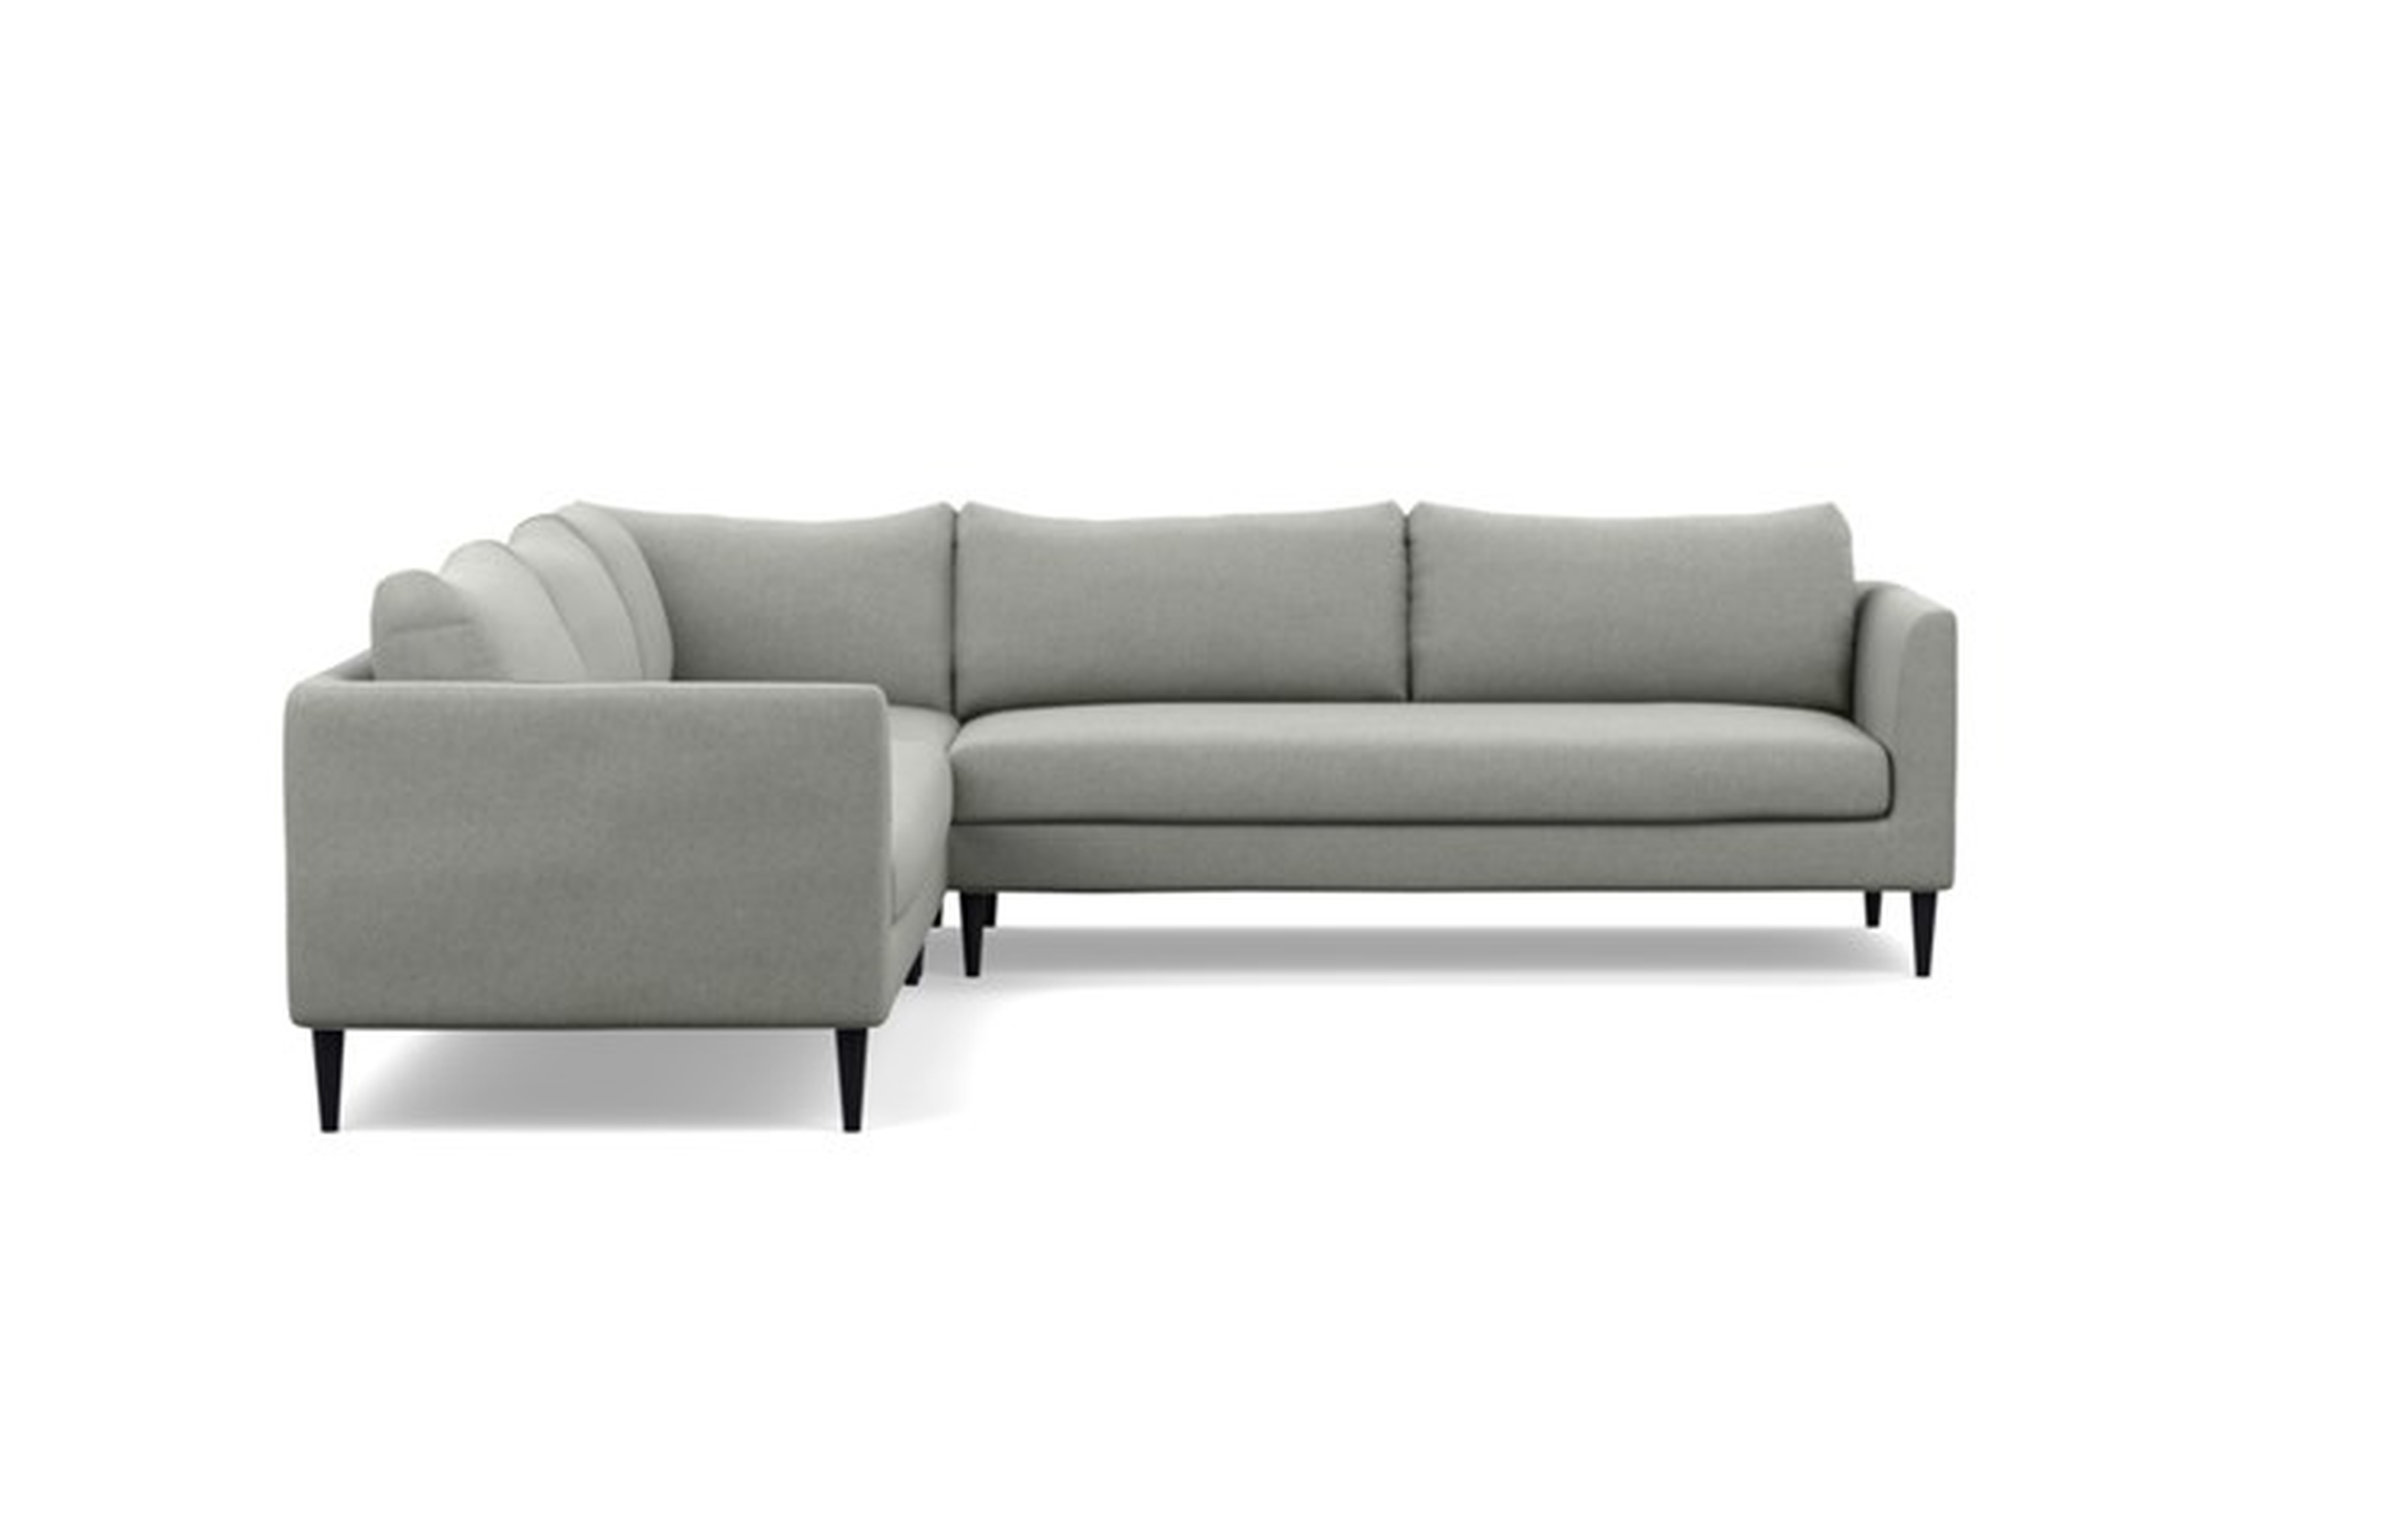 Owens Corner Sectional with Ecru Fabric and Painted Black legs - Interior Define